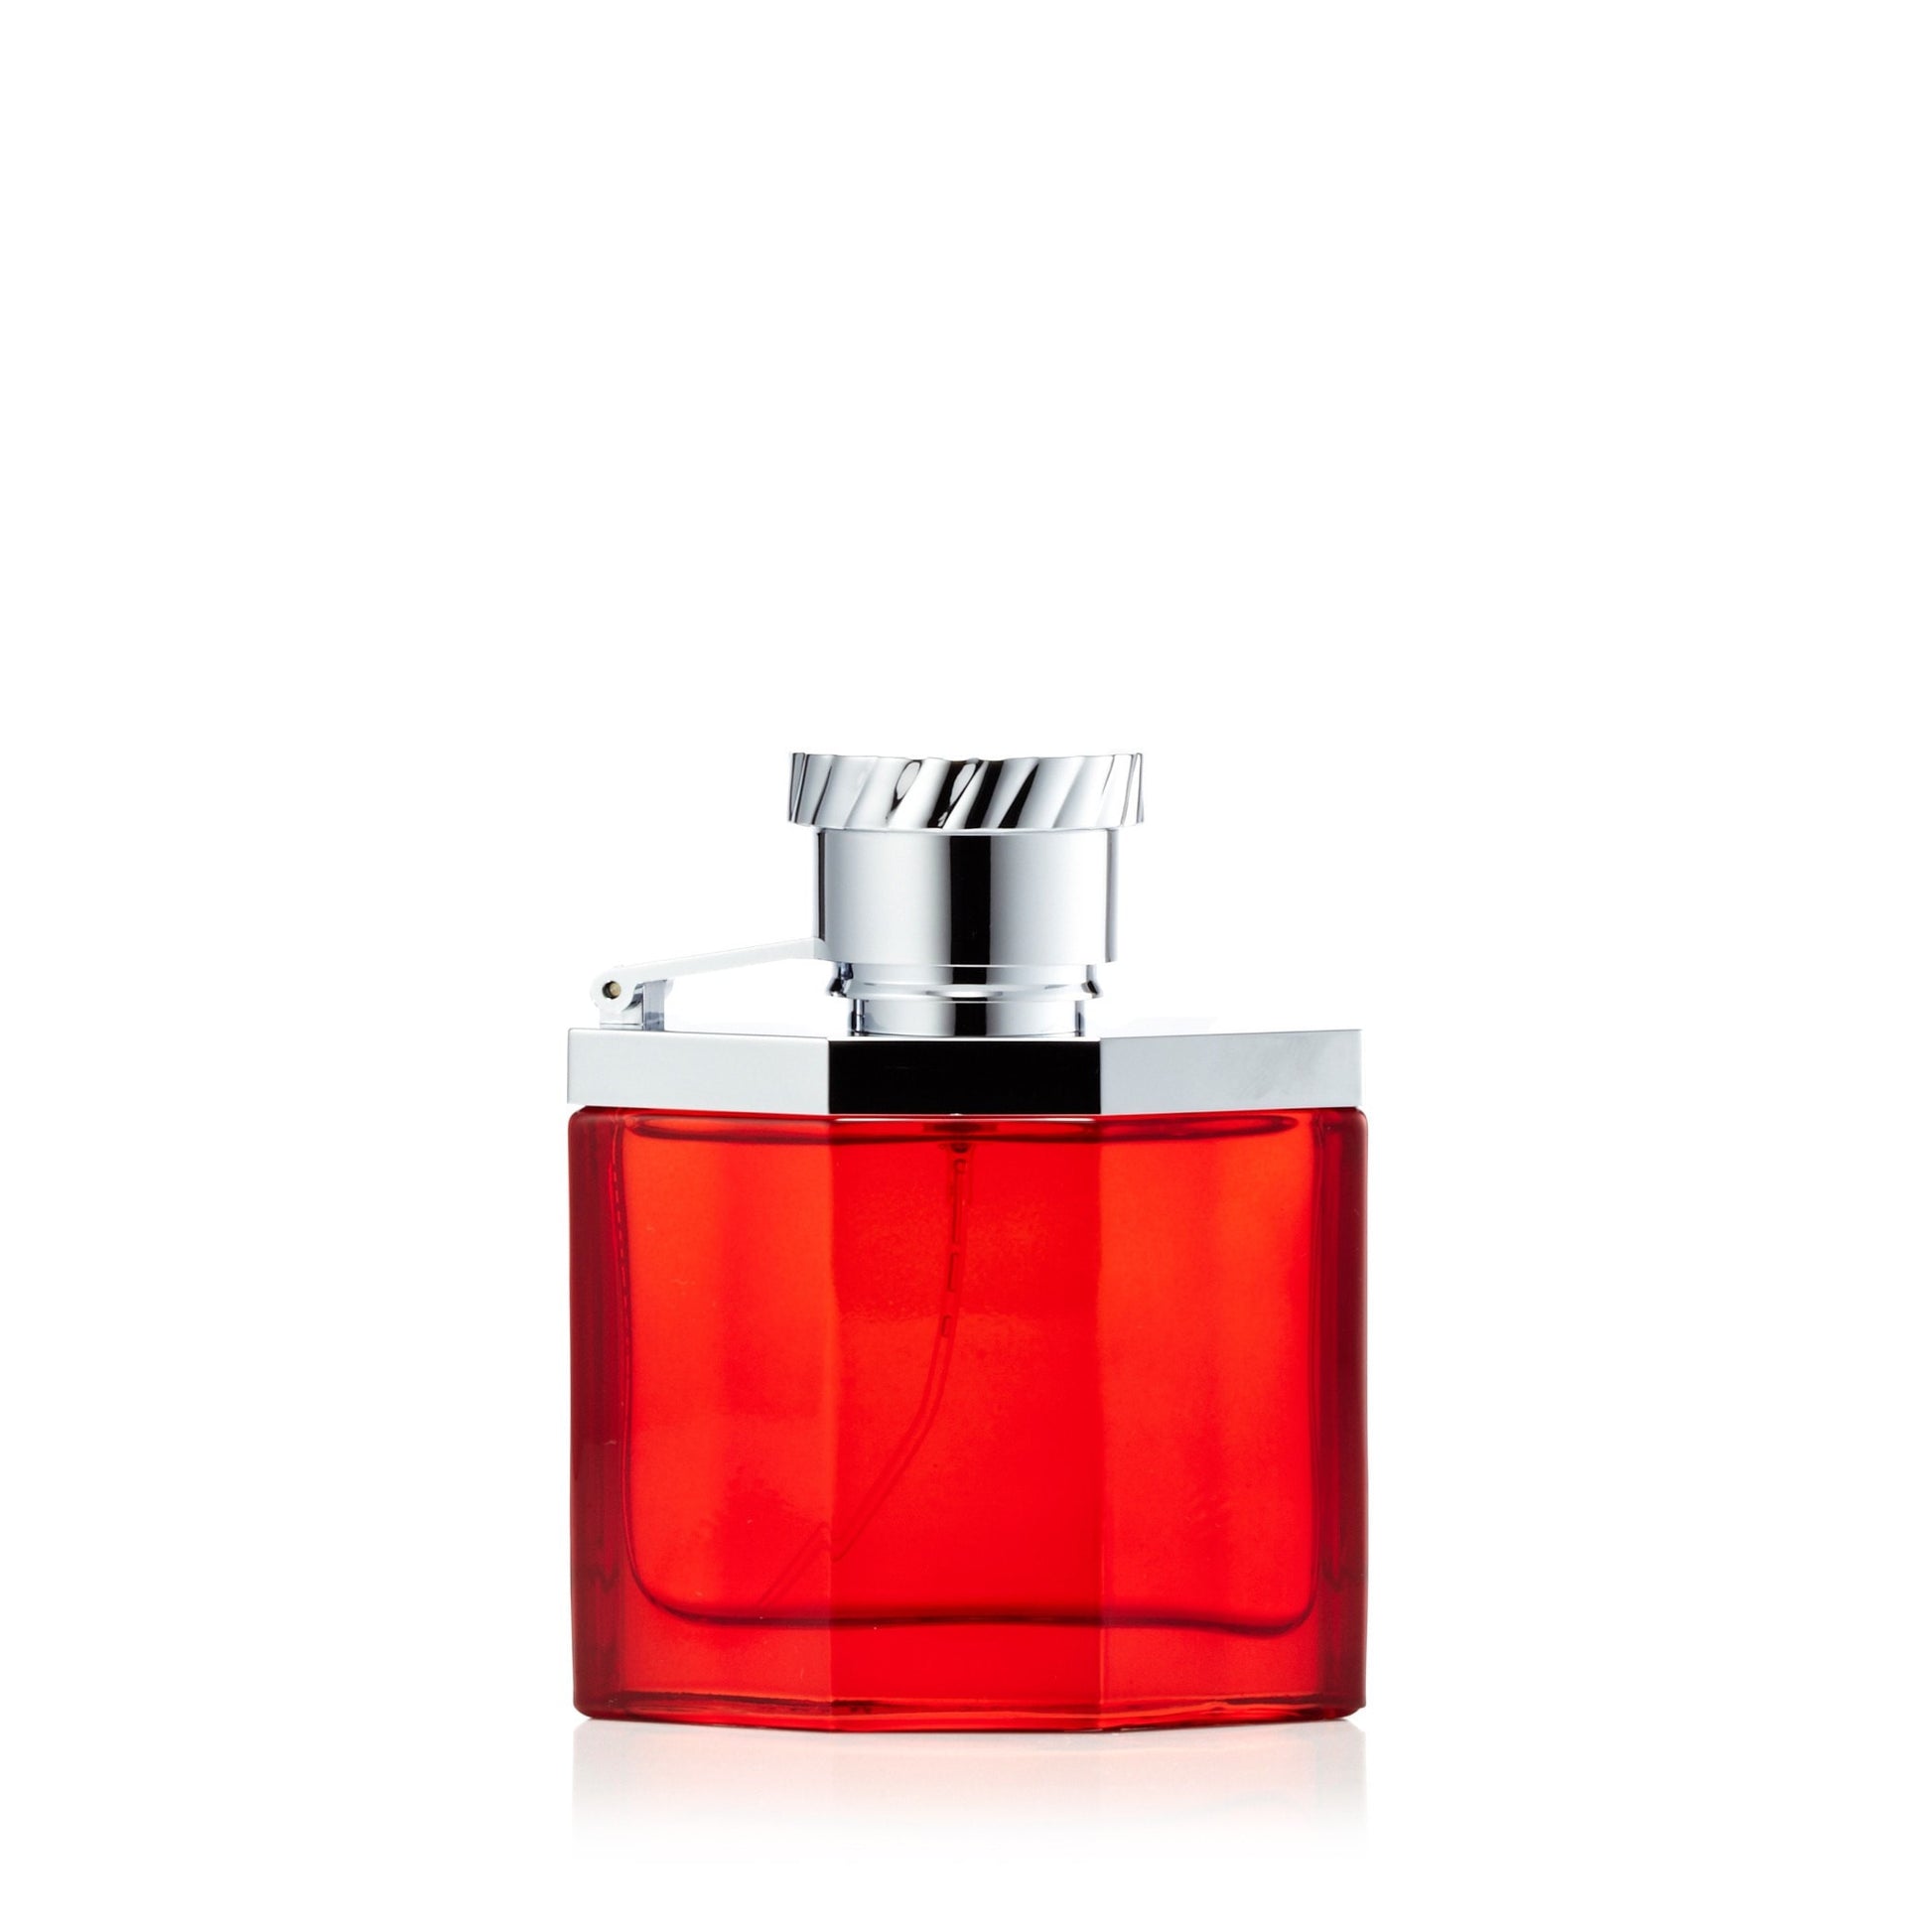 Desire Red Eau de Toilette Spray for Men by Alfred Dunhill 1.7 oz. Click to open in modal